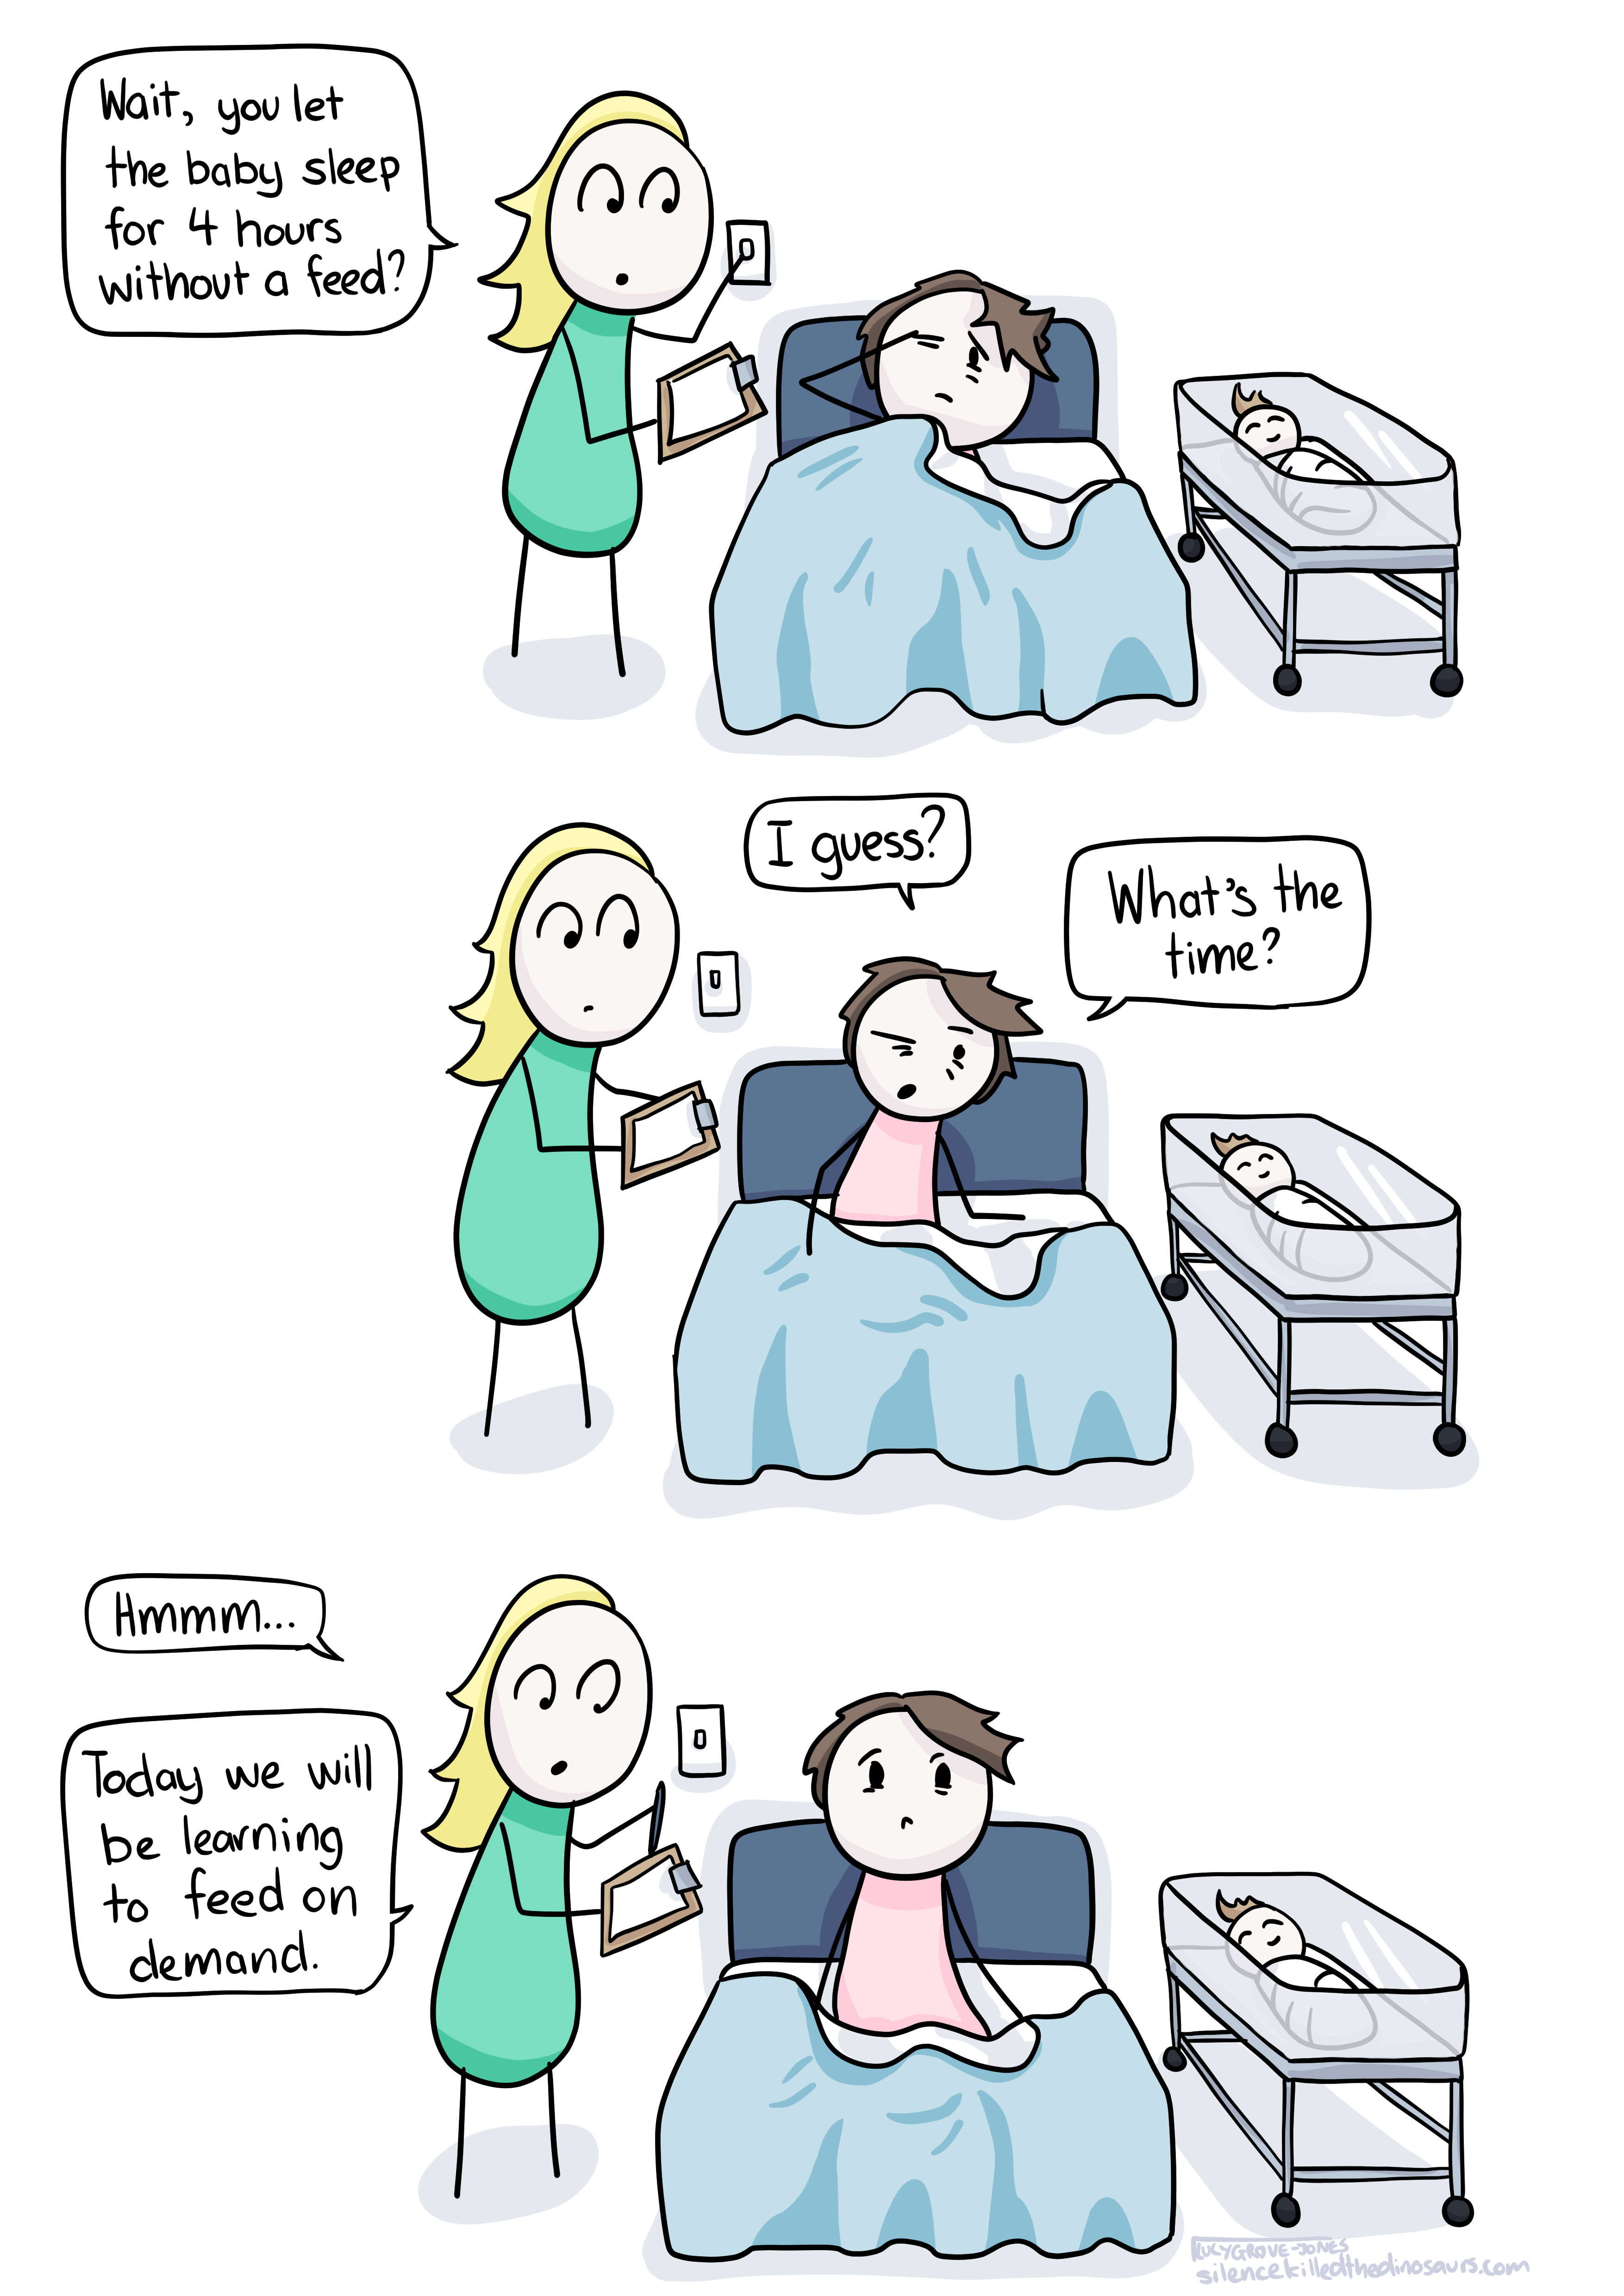 Three panels of a comic. In all, comic Lucy is in a hospital bed, a bassinet is next to her with a sleeping baby, a midwife has come in and turned the light on. First panel: comic Lucy is lying down, groggy, rubbing eyes. The midwife has a clipboard and is saying 'Wait, you let the baby sleep for 4 hours without a feed?'. Panel 2: Comic Lucy sits up, but still looks groggy, and says 'I guess? What's the time?'. Panel 3, The midwife makes a note on the clipboard and says 'Hmmm... today we will be learning to feed on demand.'